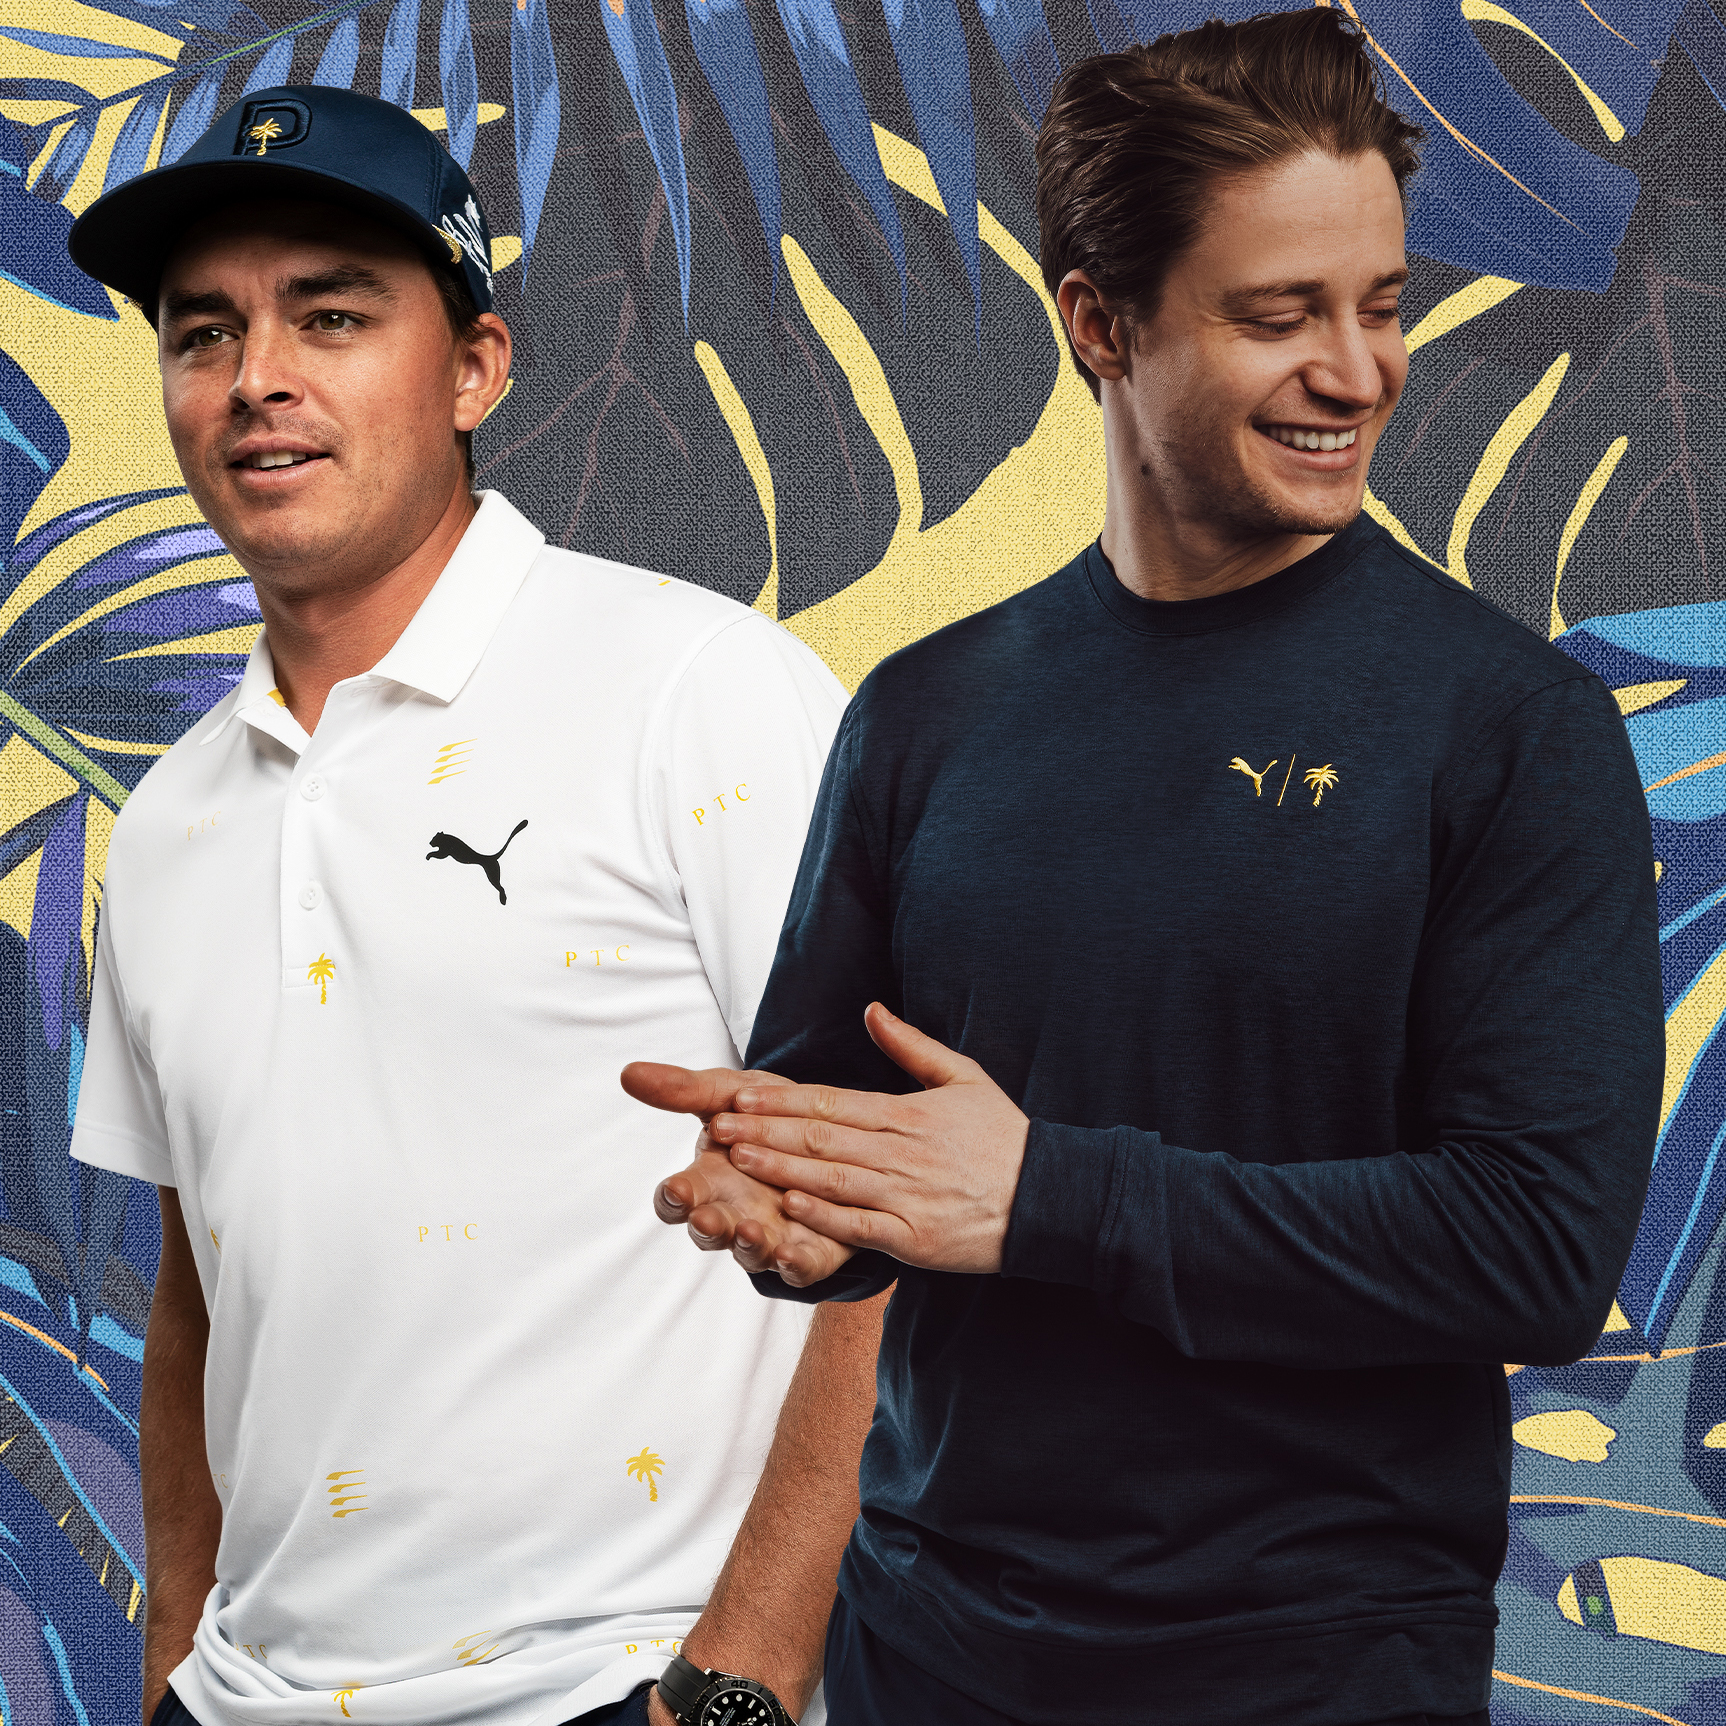 caos Pedagogía Implacable Rickie Fowler partners with international DJ Kygo on a new golf style line,  including a new driver Rickie will play at The Players | Golf Equipment:  Clubs, Balls, Bags | Golf Digest